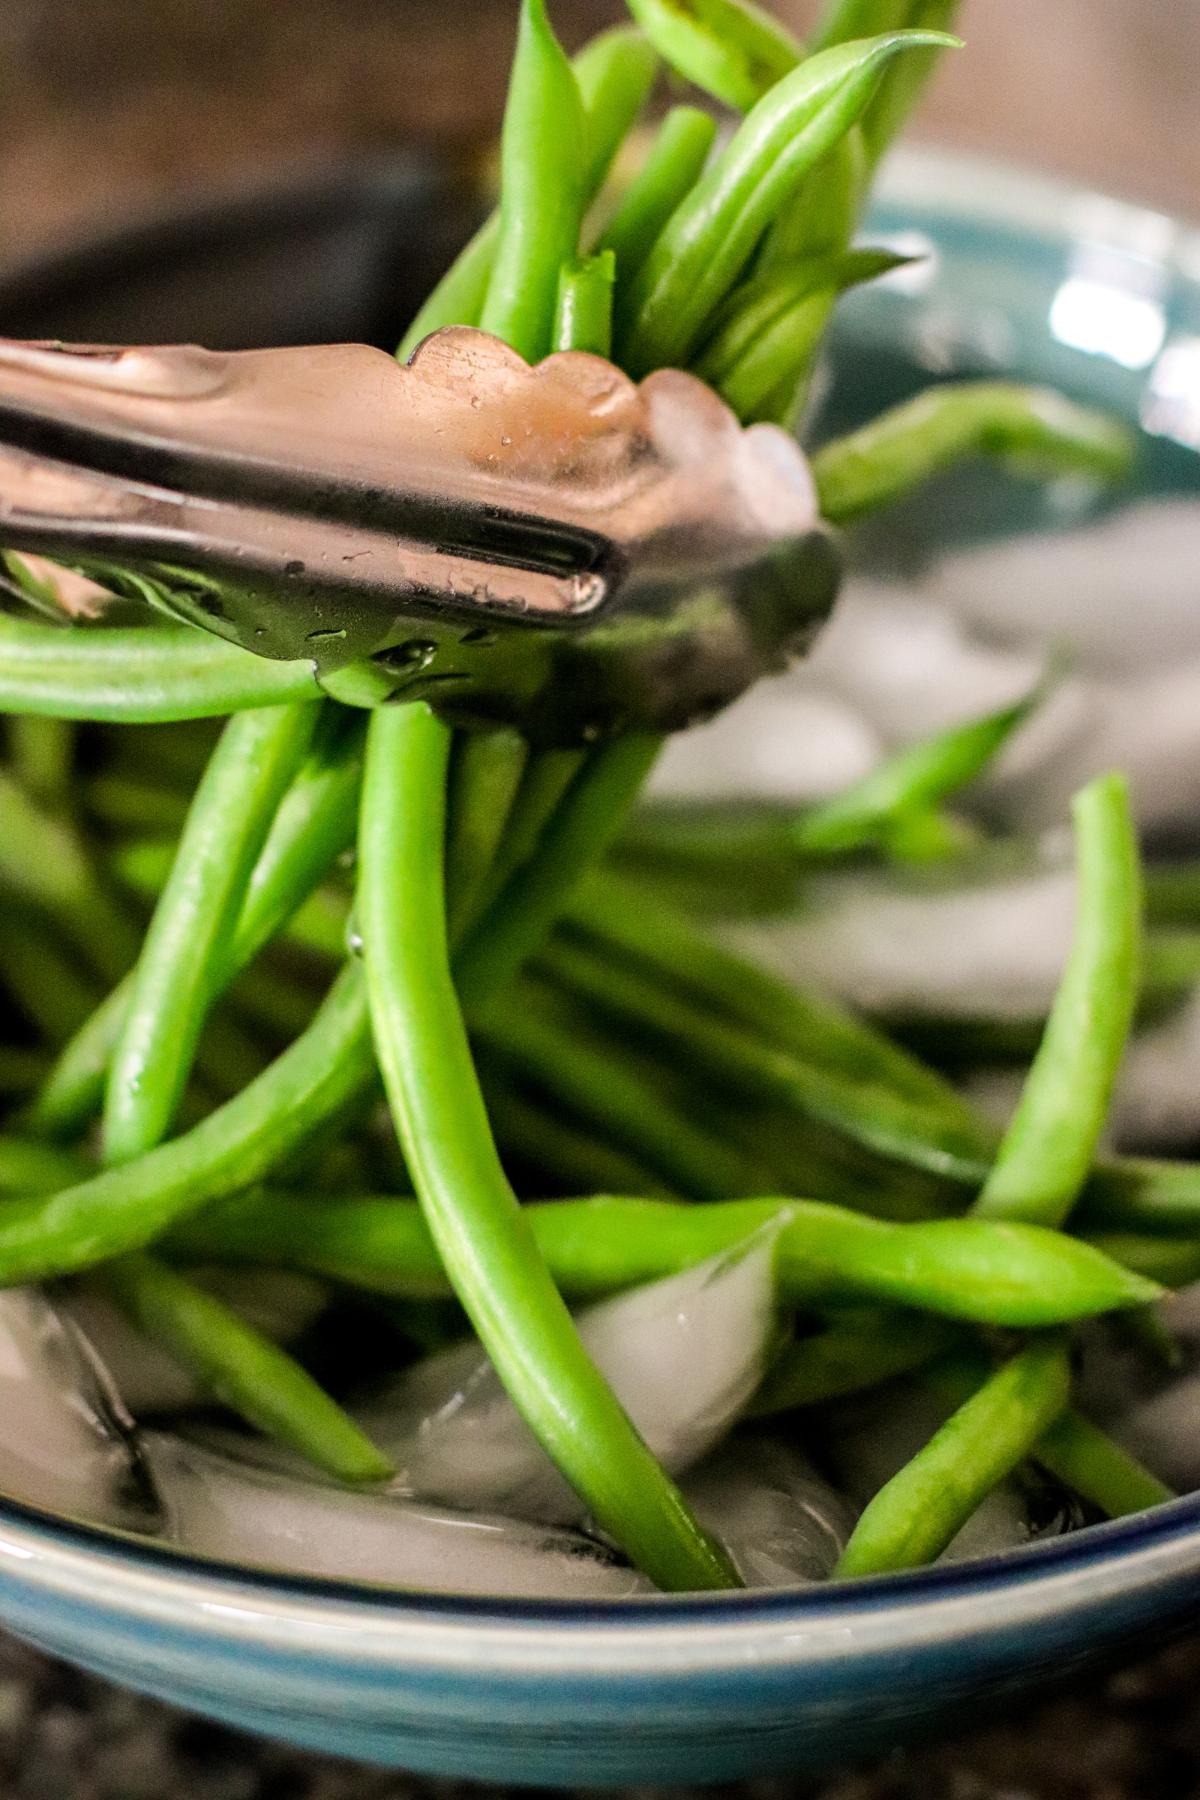 Using tongs to transfer the green beans from the boiling water to the bowl of ice water.